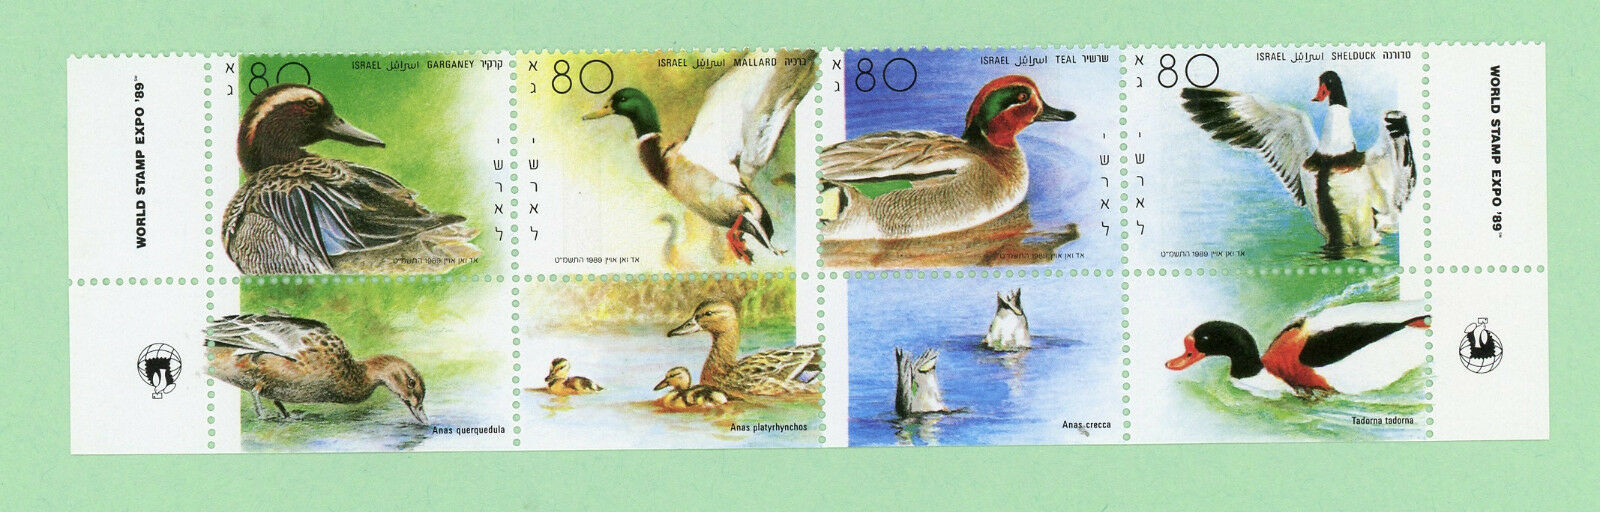 Israel 4 Stamp strip with tab, SC 1025, Holy Land Ducks, 1989, MNH